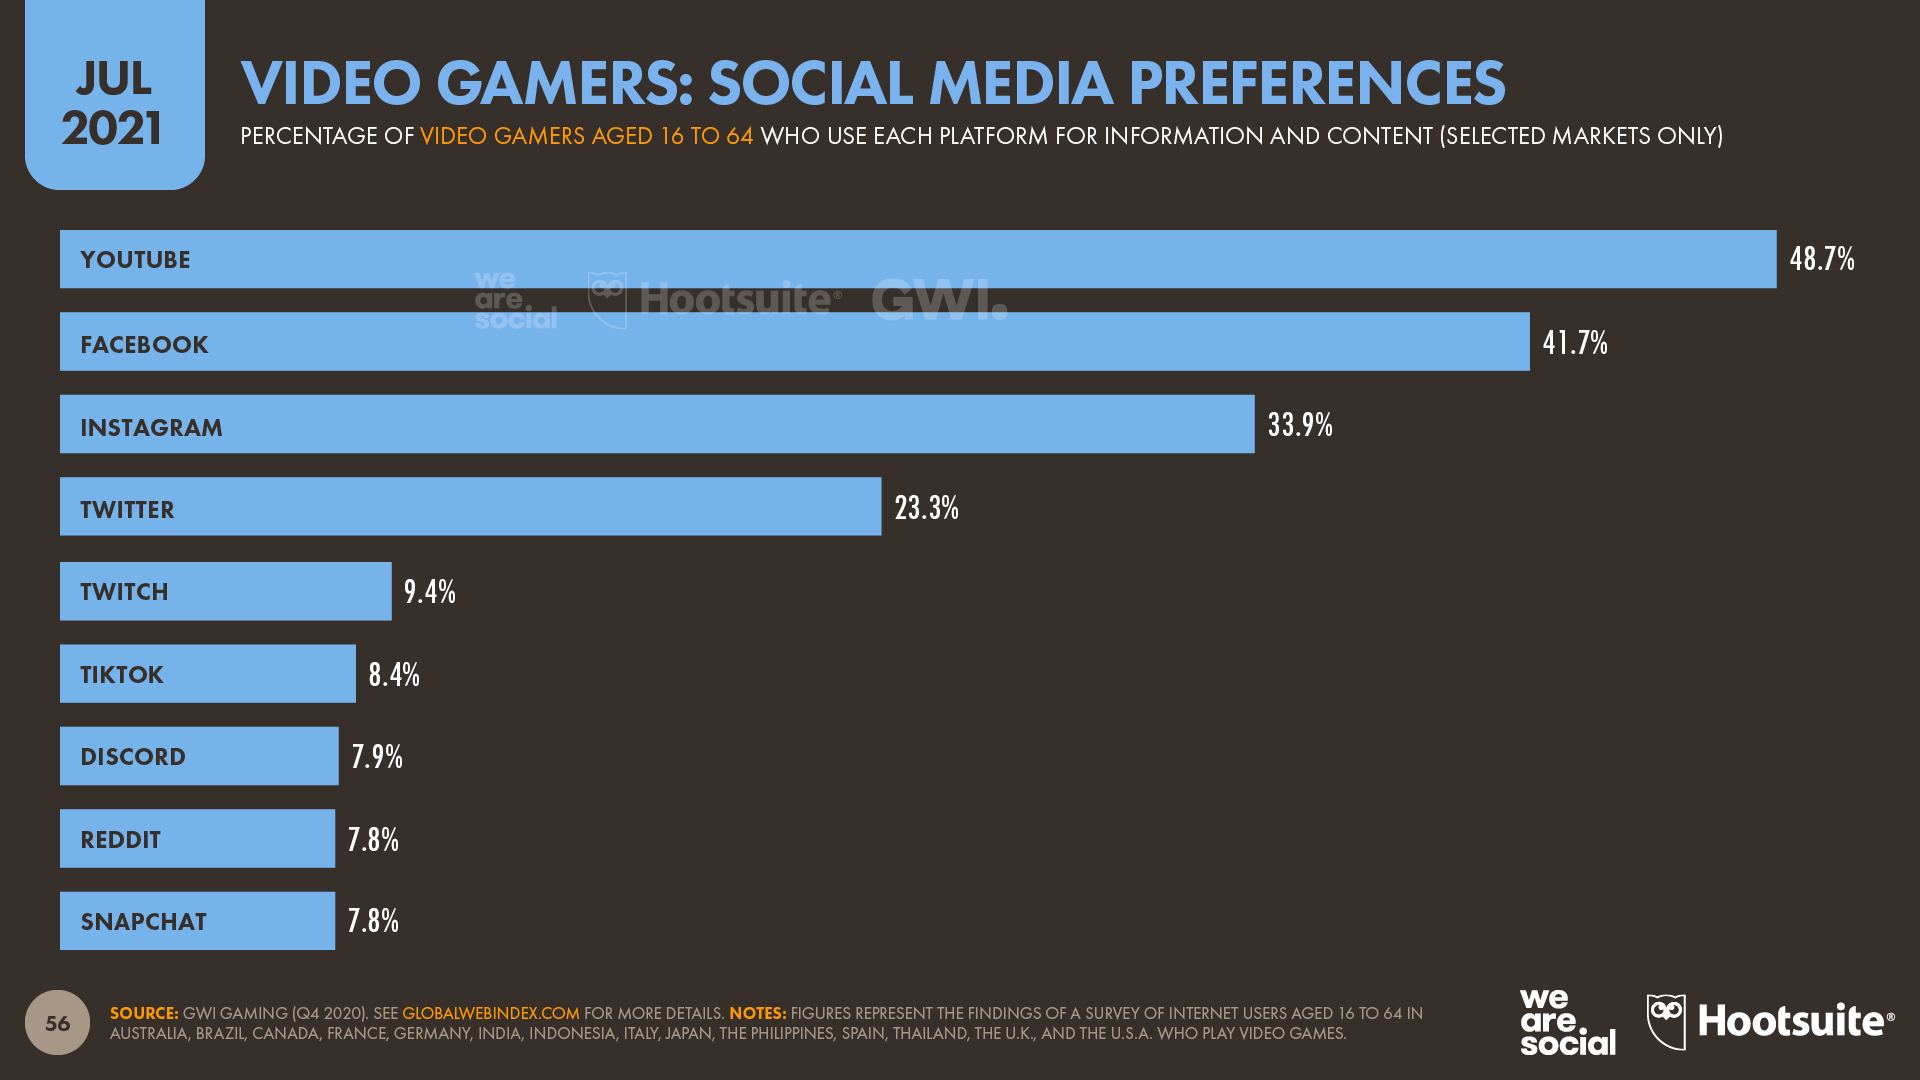 chart showing video gamers' social media preferences as of July 2021